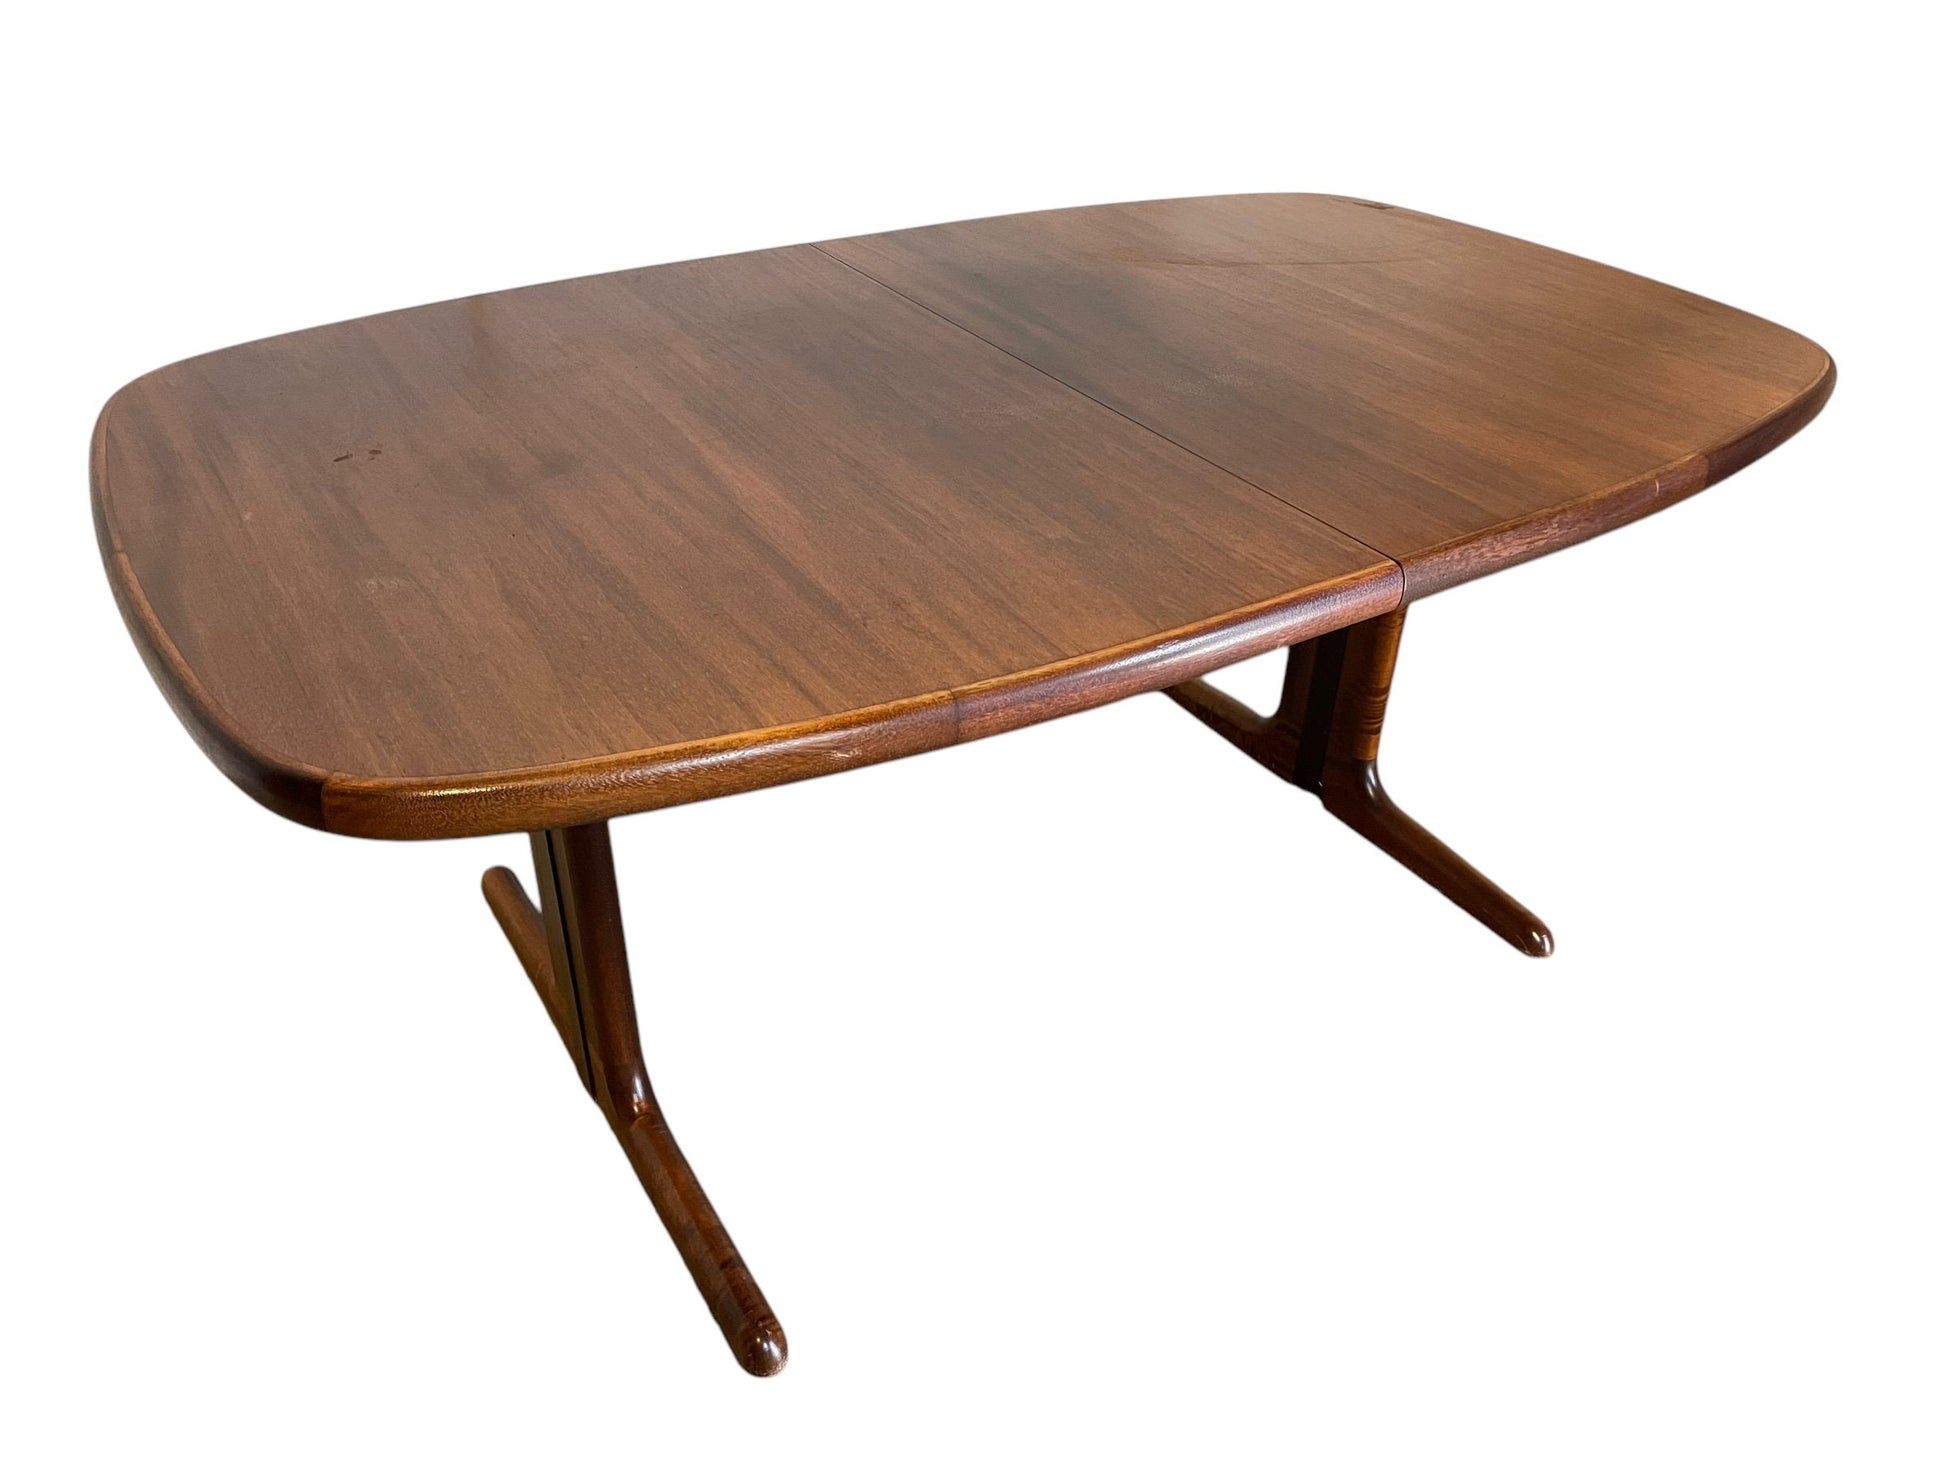 Mid-Century Modern Rosewood dining table with 2 leaves from Skovby 1960's